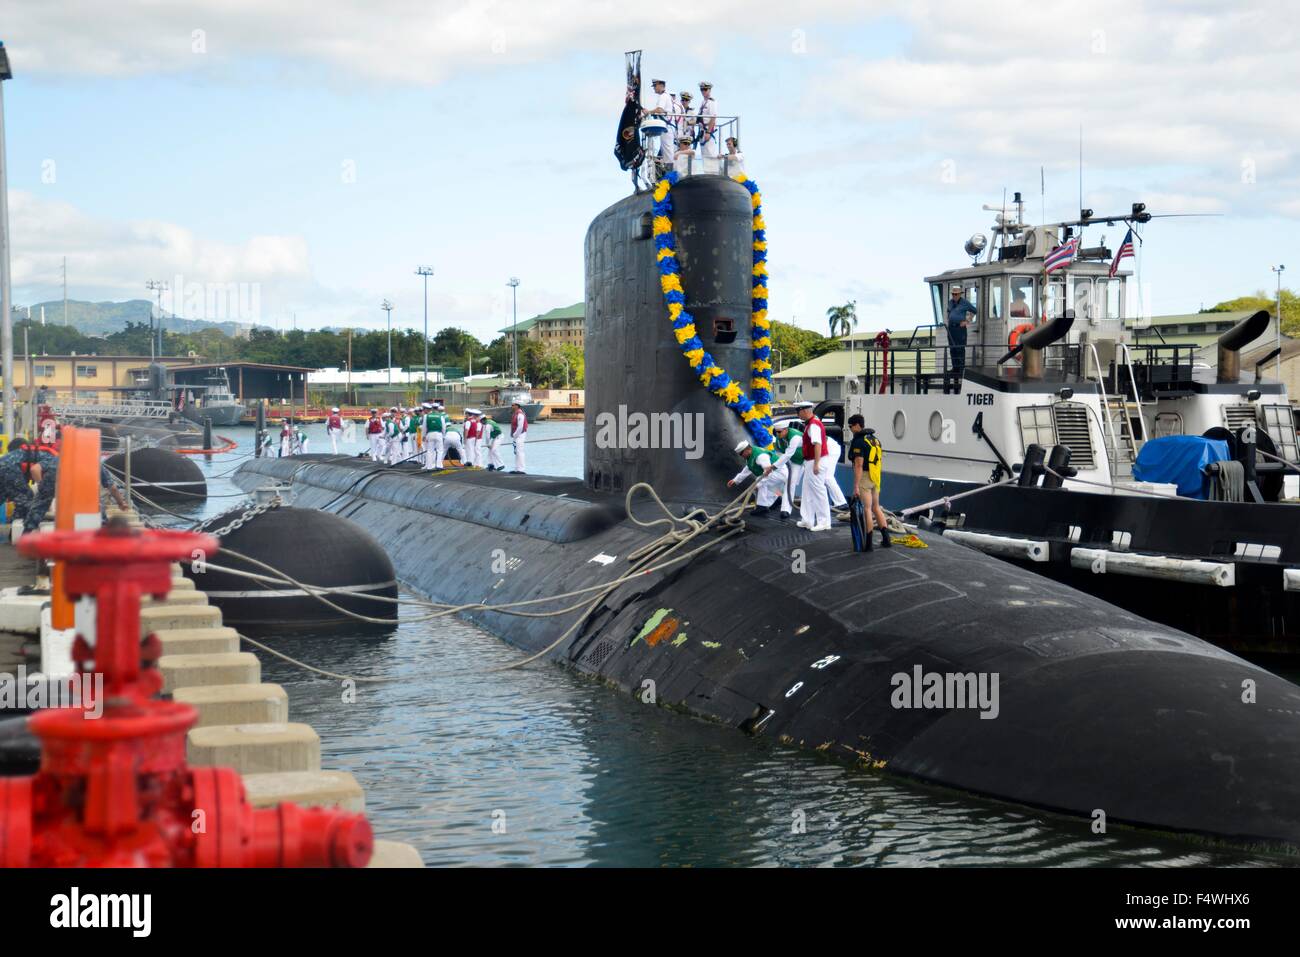 US Navy Virginia-class attack submarine USS Hawaii with a giant floral lei on the conning tower returns to Joint Base Pearl Harbor-Hickam for routine operations March 10, 2015 in Honolulu, Hawaii. Stock Photo